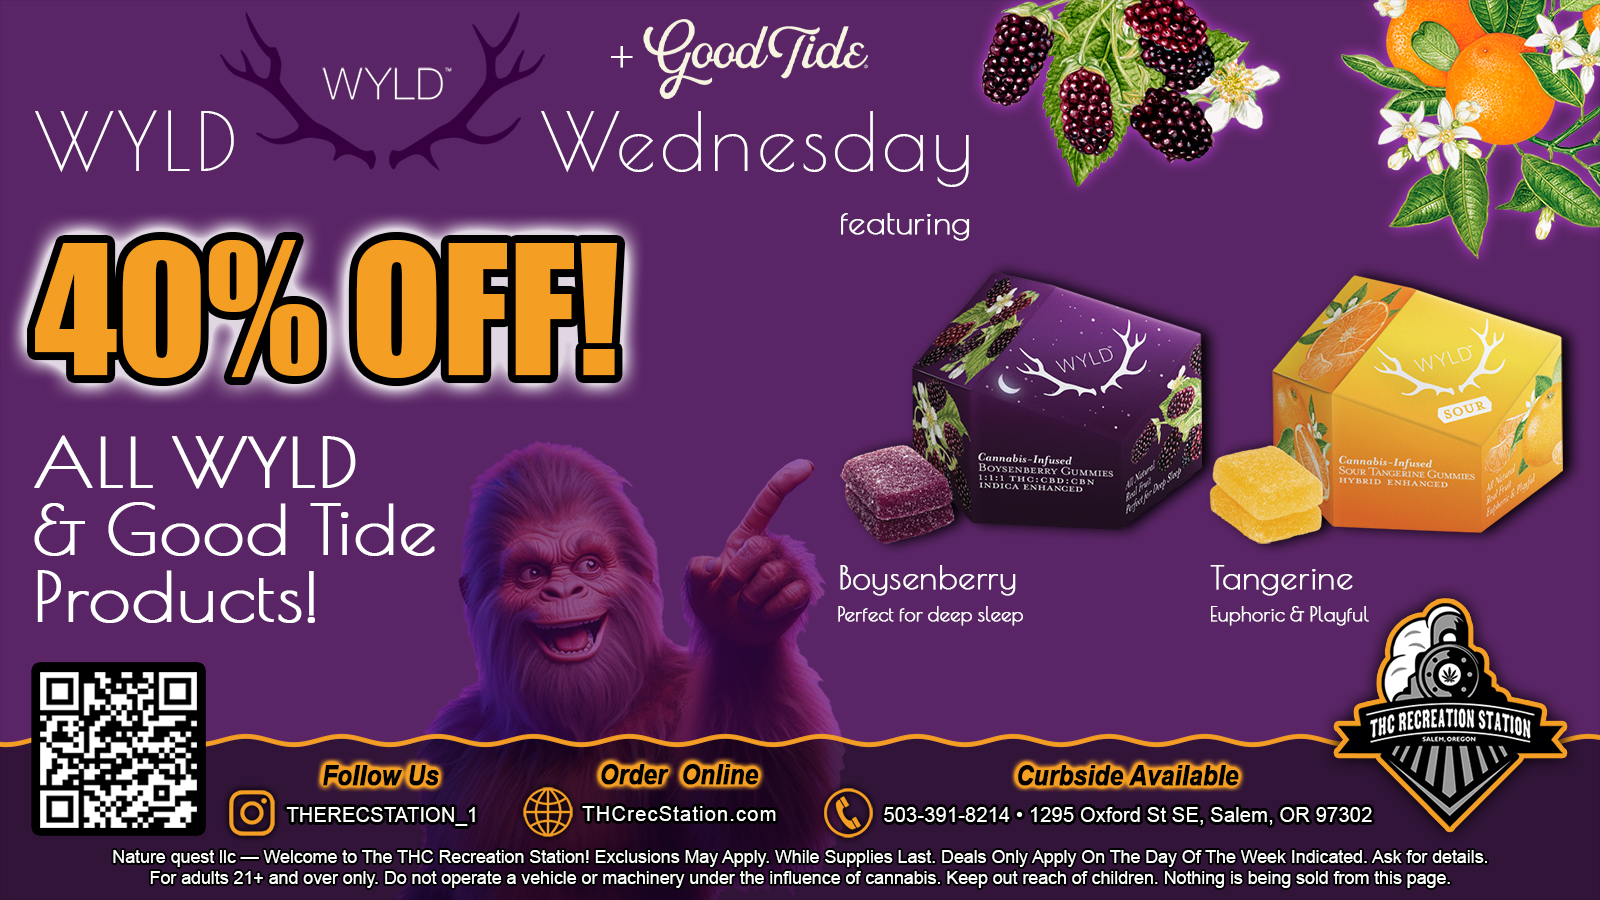 WYLD Wednesdays Sale - Save 40% on all WYLD products including their new single piece WYLD Ones! Also save 40% on all Good Tide products! - Including their yummy, solventless, hash rosin, vegan, made with real fruit, completely compostable packaged gummies! 